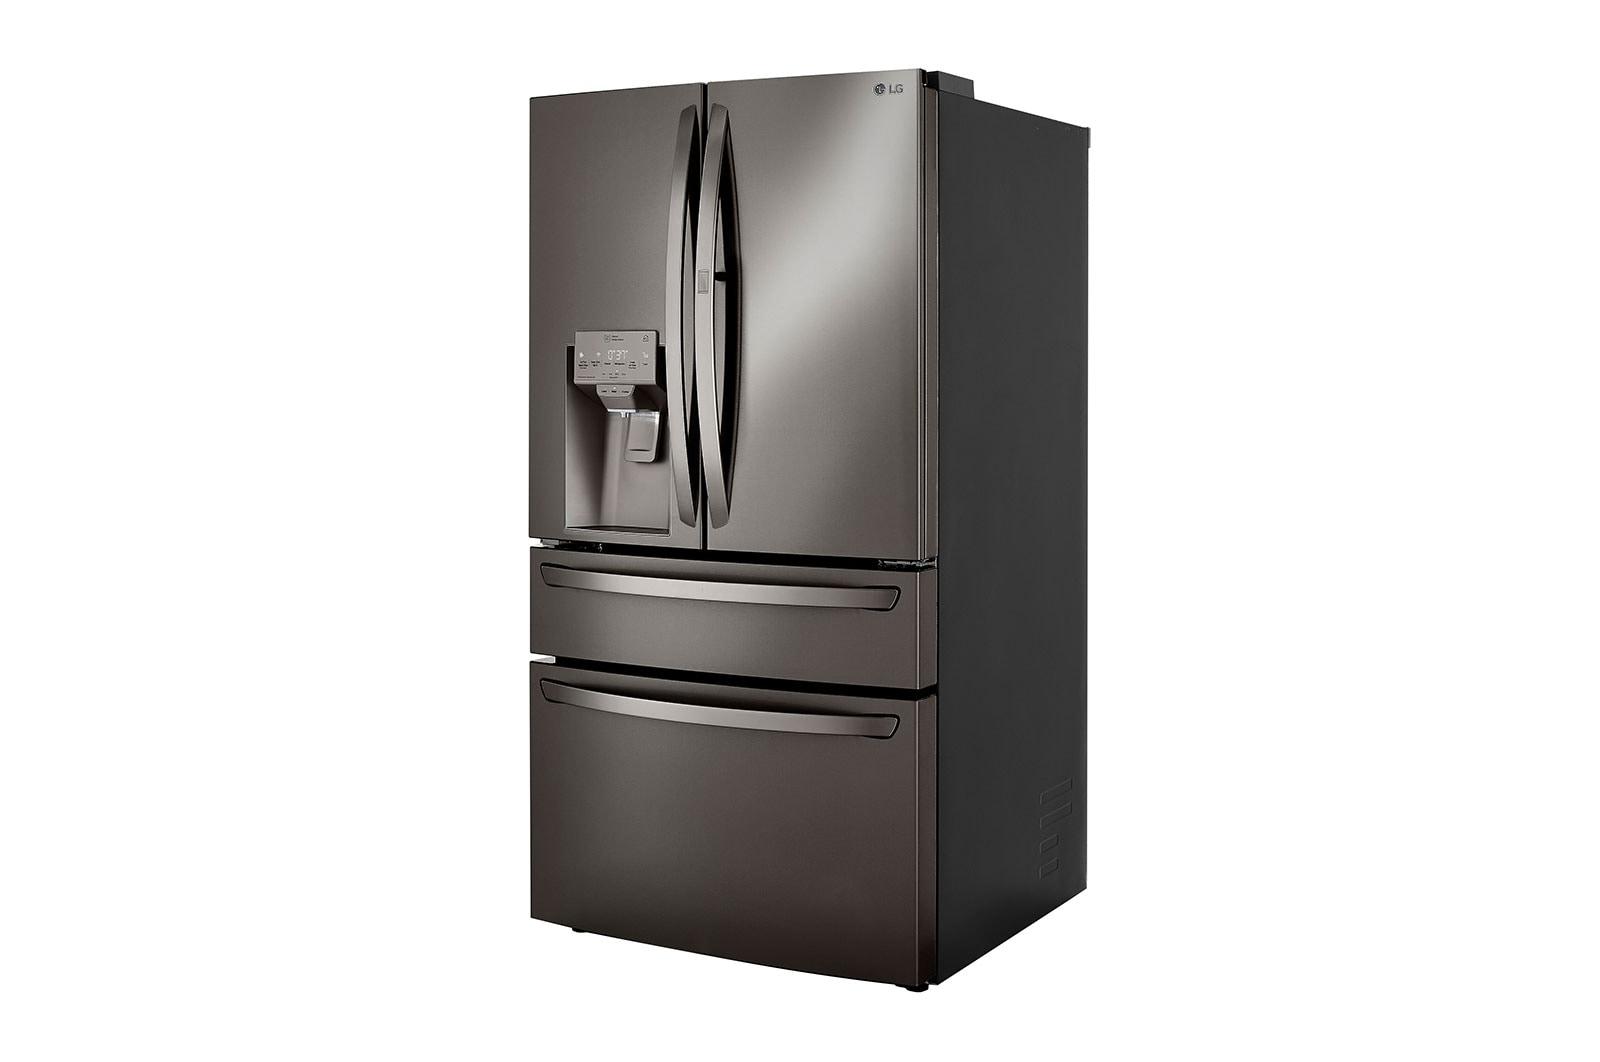 23 cu. ft. Smart Wi-Fi Enabled Counter-Depth Refrigerator with Craft Ice™ Maker